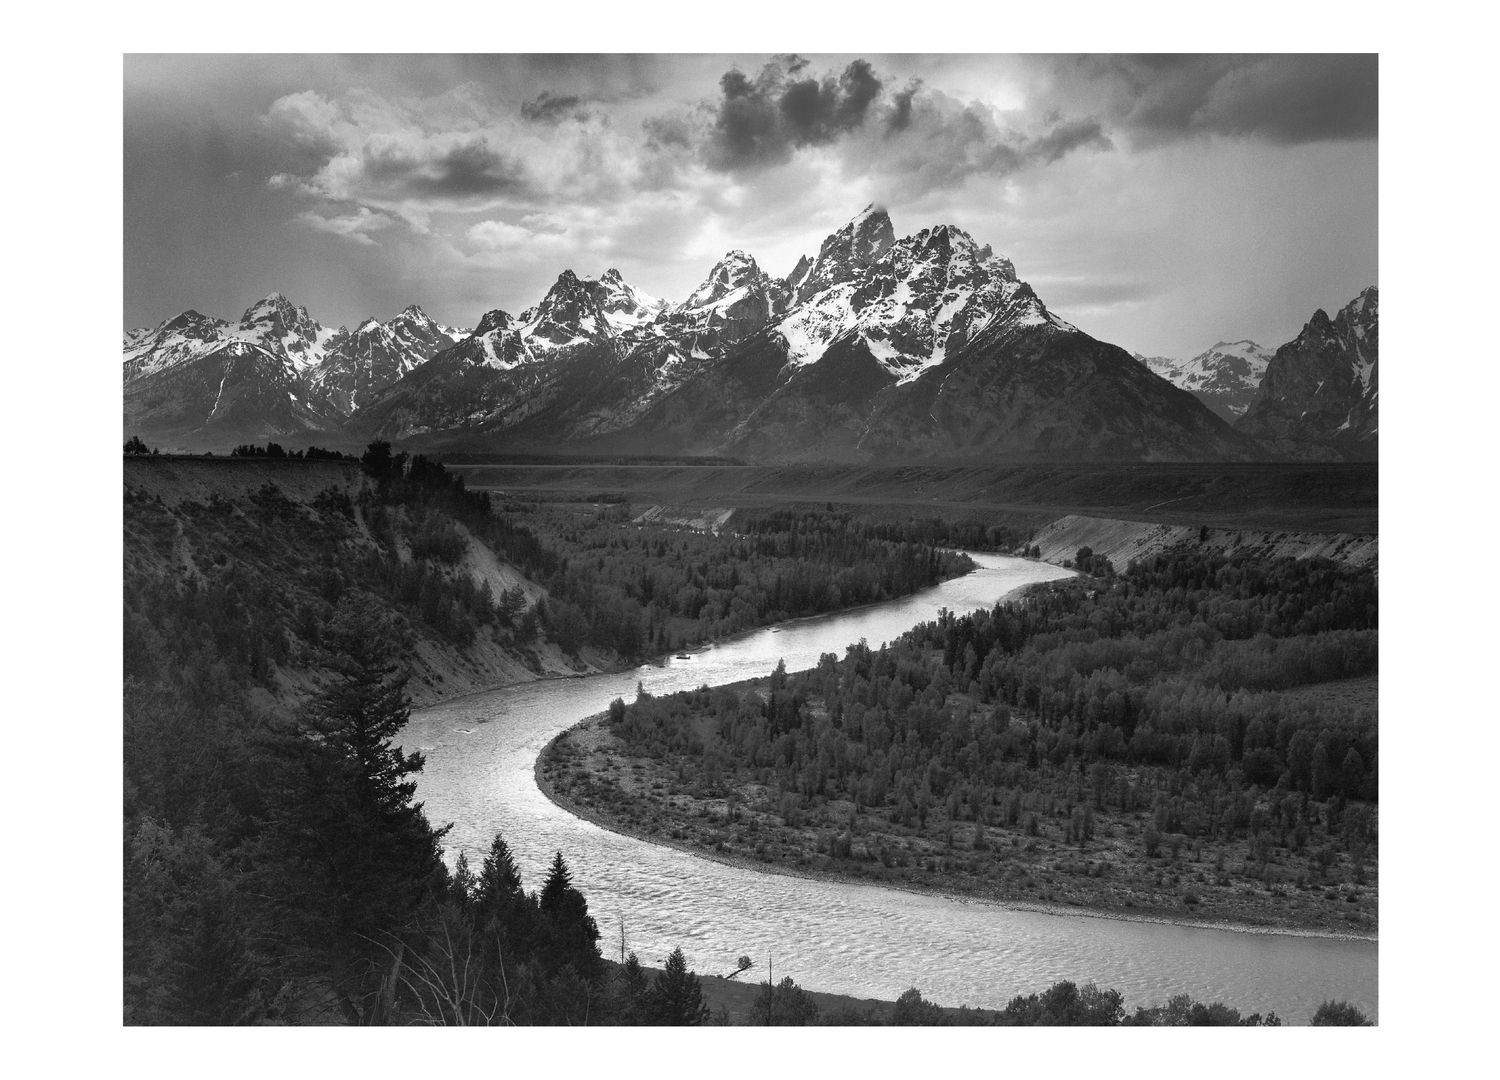 THE TETONS AND SNAKE RIVER - ANSEL ADAMS NOTE CARD